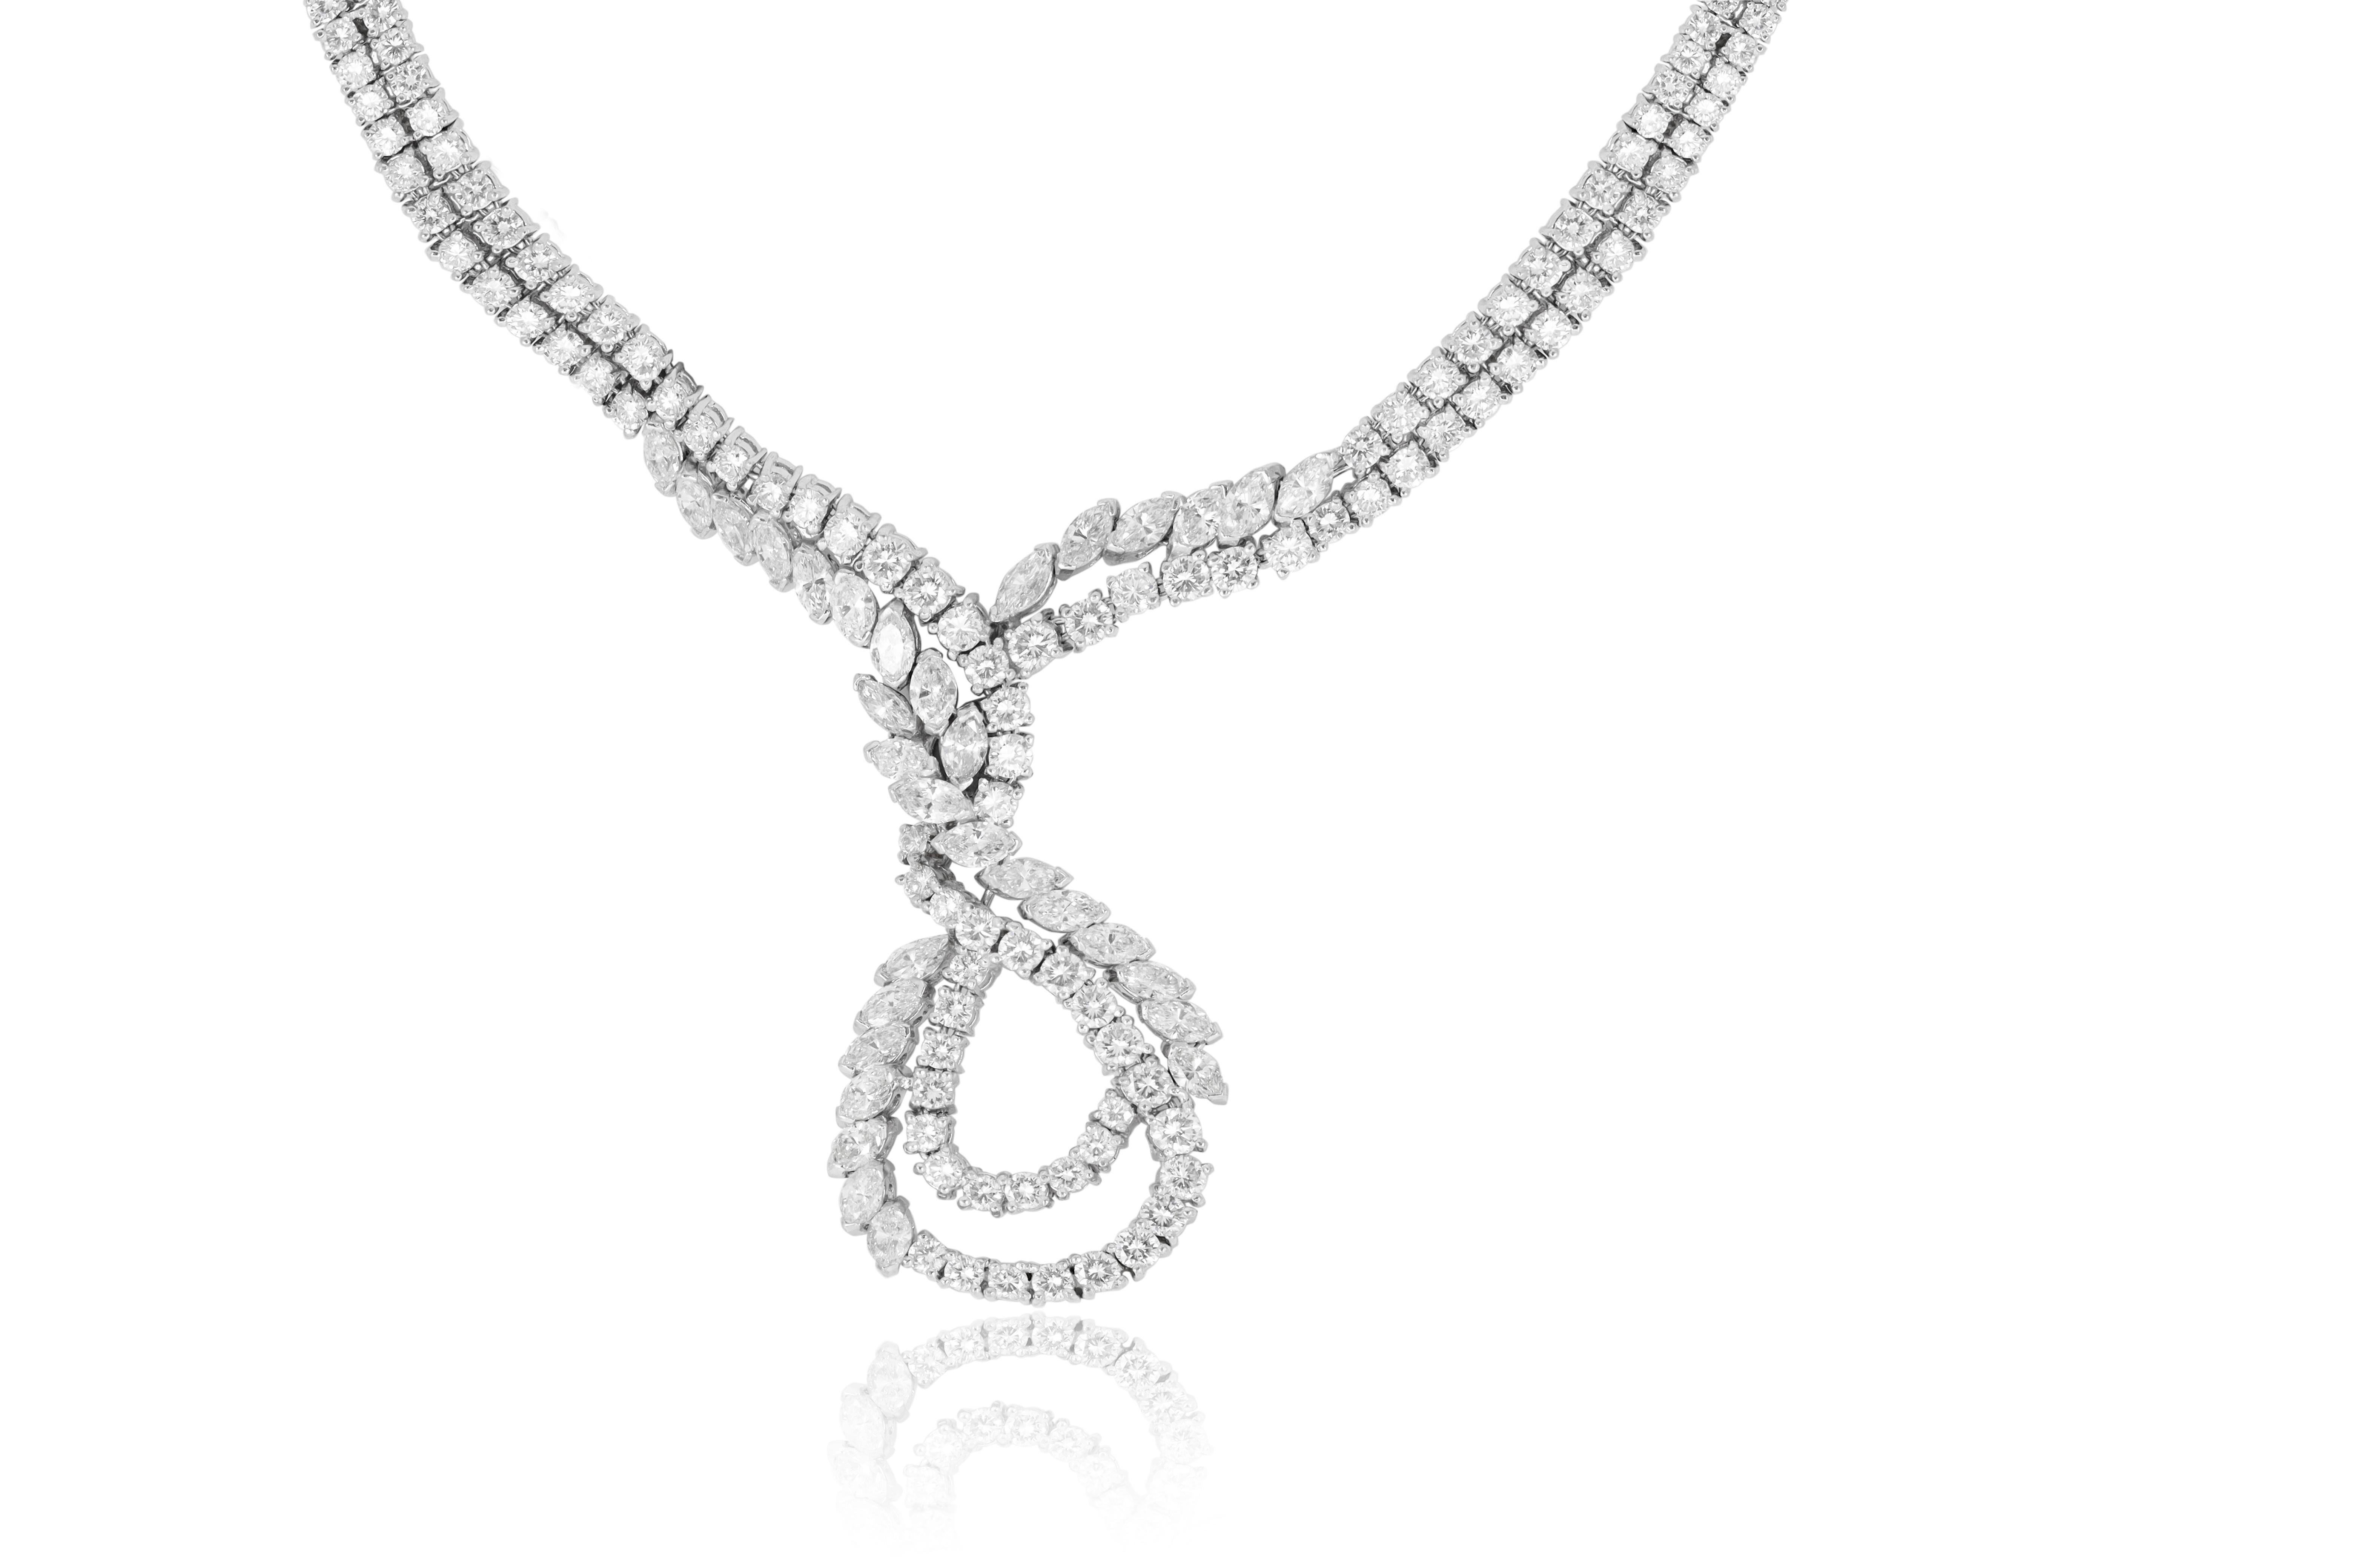 Platinum diamond necklace featuring 27.90 carats of diamonds (rounds and marquise) the necklace is double row
